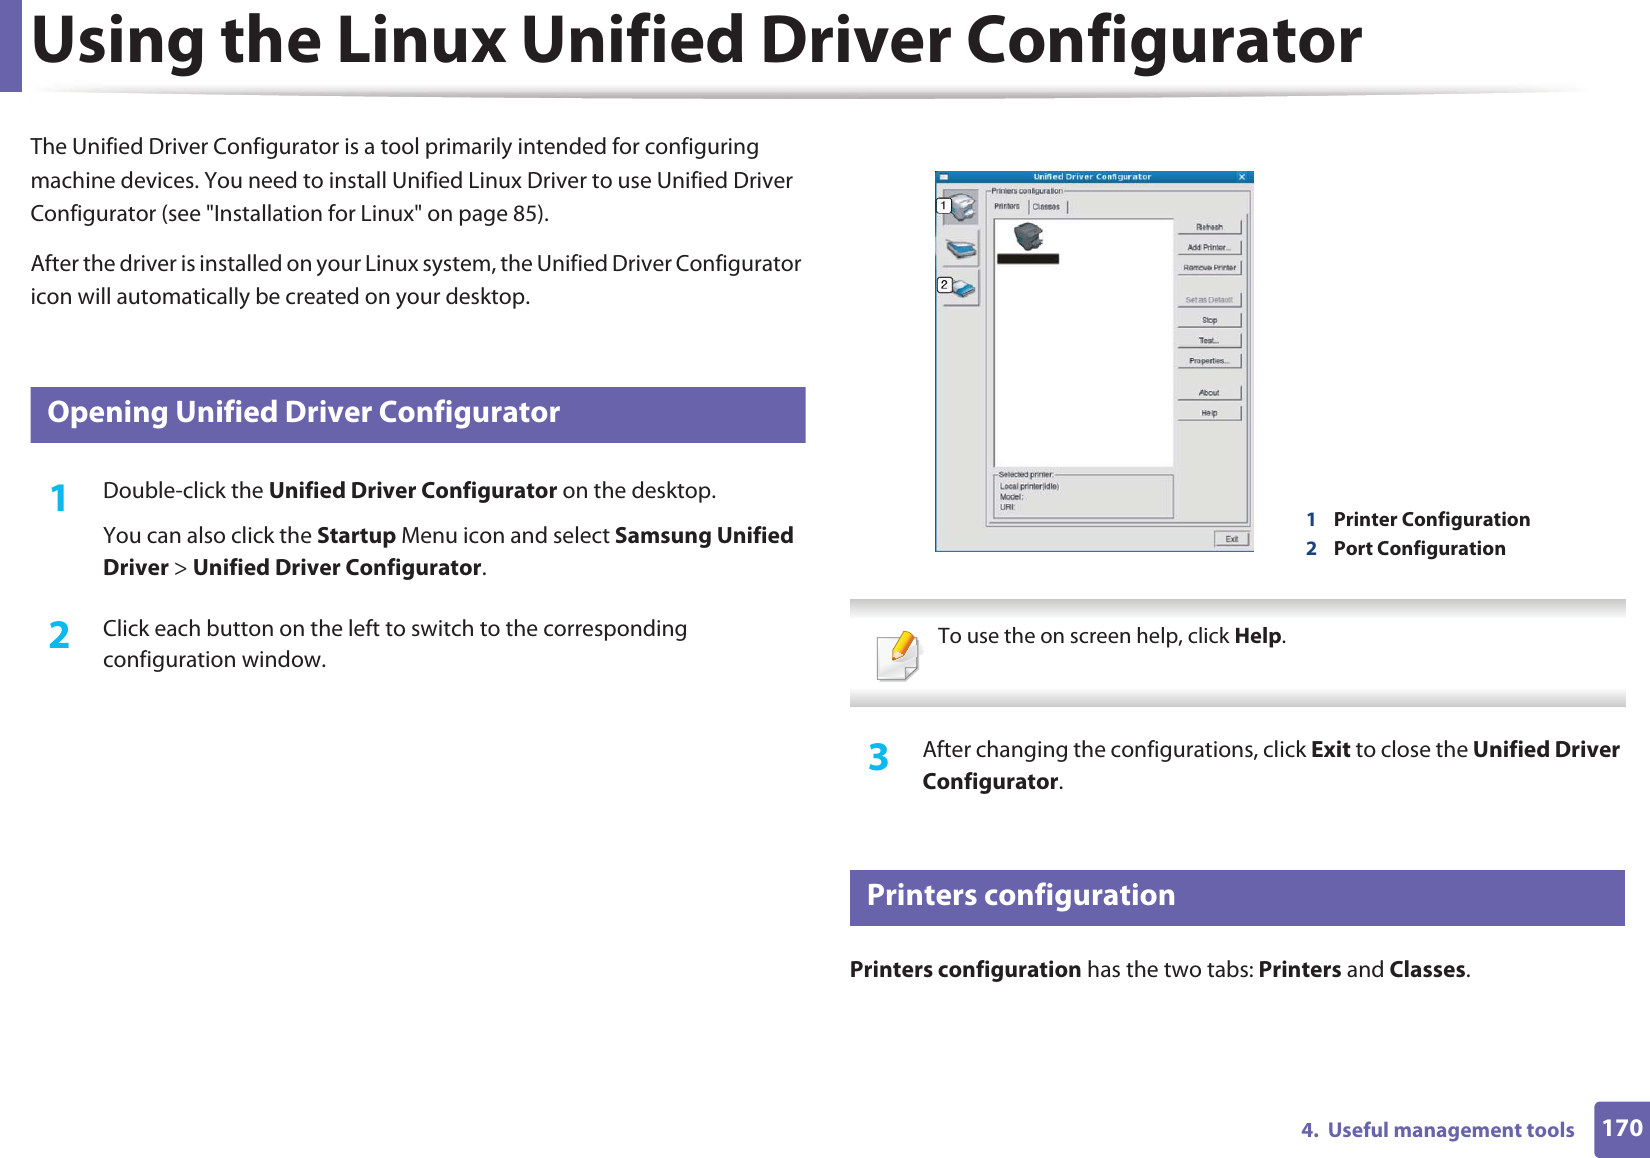 1704.  Useful management toolsUsing the Linux Unified Driver ConfiguratorThe Unified Driver Configurator is a tool primarily intended for configuring machine devices. You need to install Unified Linux Driver to use Unified Driver Configurator (see &quot;Installation for Linux&quot; on page 85).After the driver is installed on your Linux system, the Unified Driver Configurator icon will automatically be created on your desktop.10 Opening Unified Driver Configurator1Double-click the Unified Driver Configurator on the desktop.You can also click the Startup Menu icon and select Samsung Unified Driver &gt; Unified Driver Configurator.2  Click each button on the left to switch to the corresponding configuration window.  To use the on screen help, click Help. 3  After changing the configurations, click Exit to close the Unified Driver Configurator.11 Printers configurationPrinters configuration has the two tabs: Printers and Classes.1Printer Configuration 2Port Configuration 